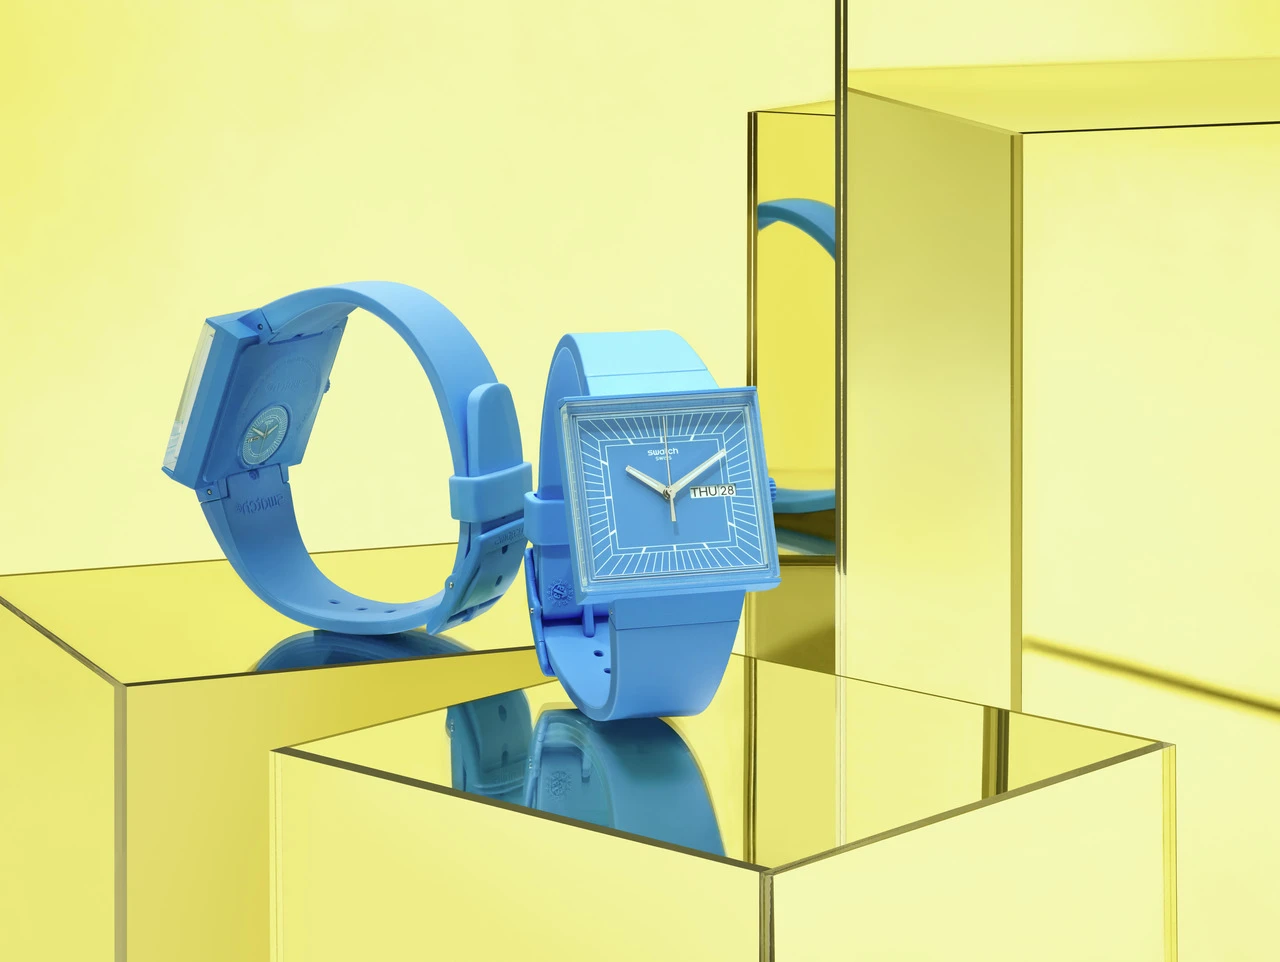 Two blue swatch watches displayed on reflective glass surfaces inside a yellow mirrored box setup, highlighting their unique square and round design details.